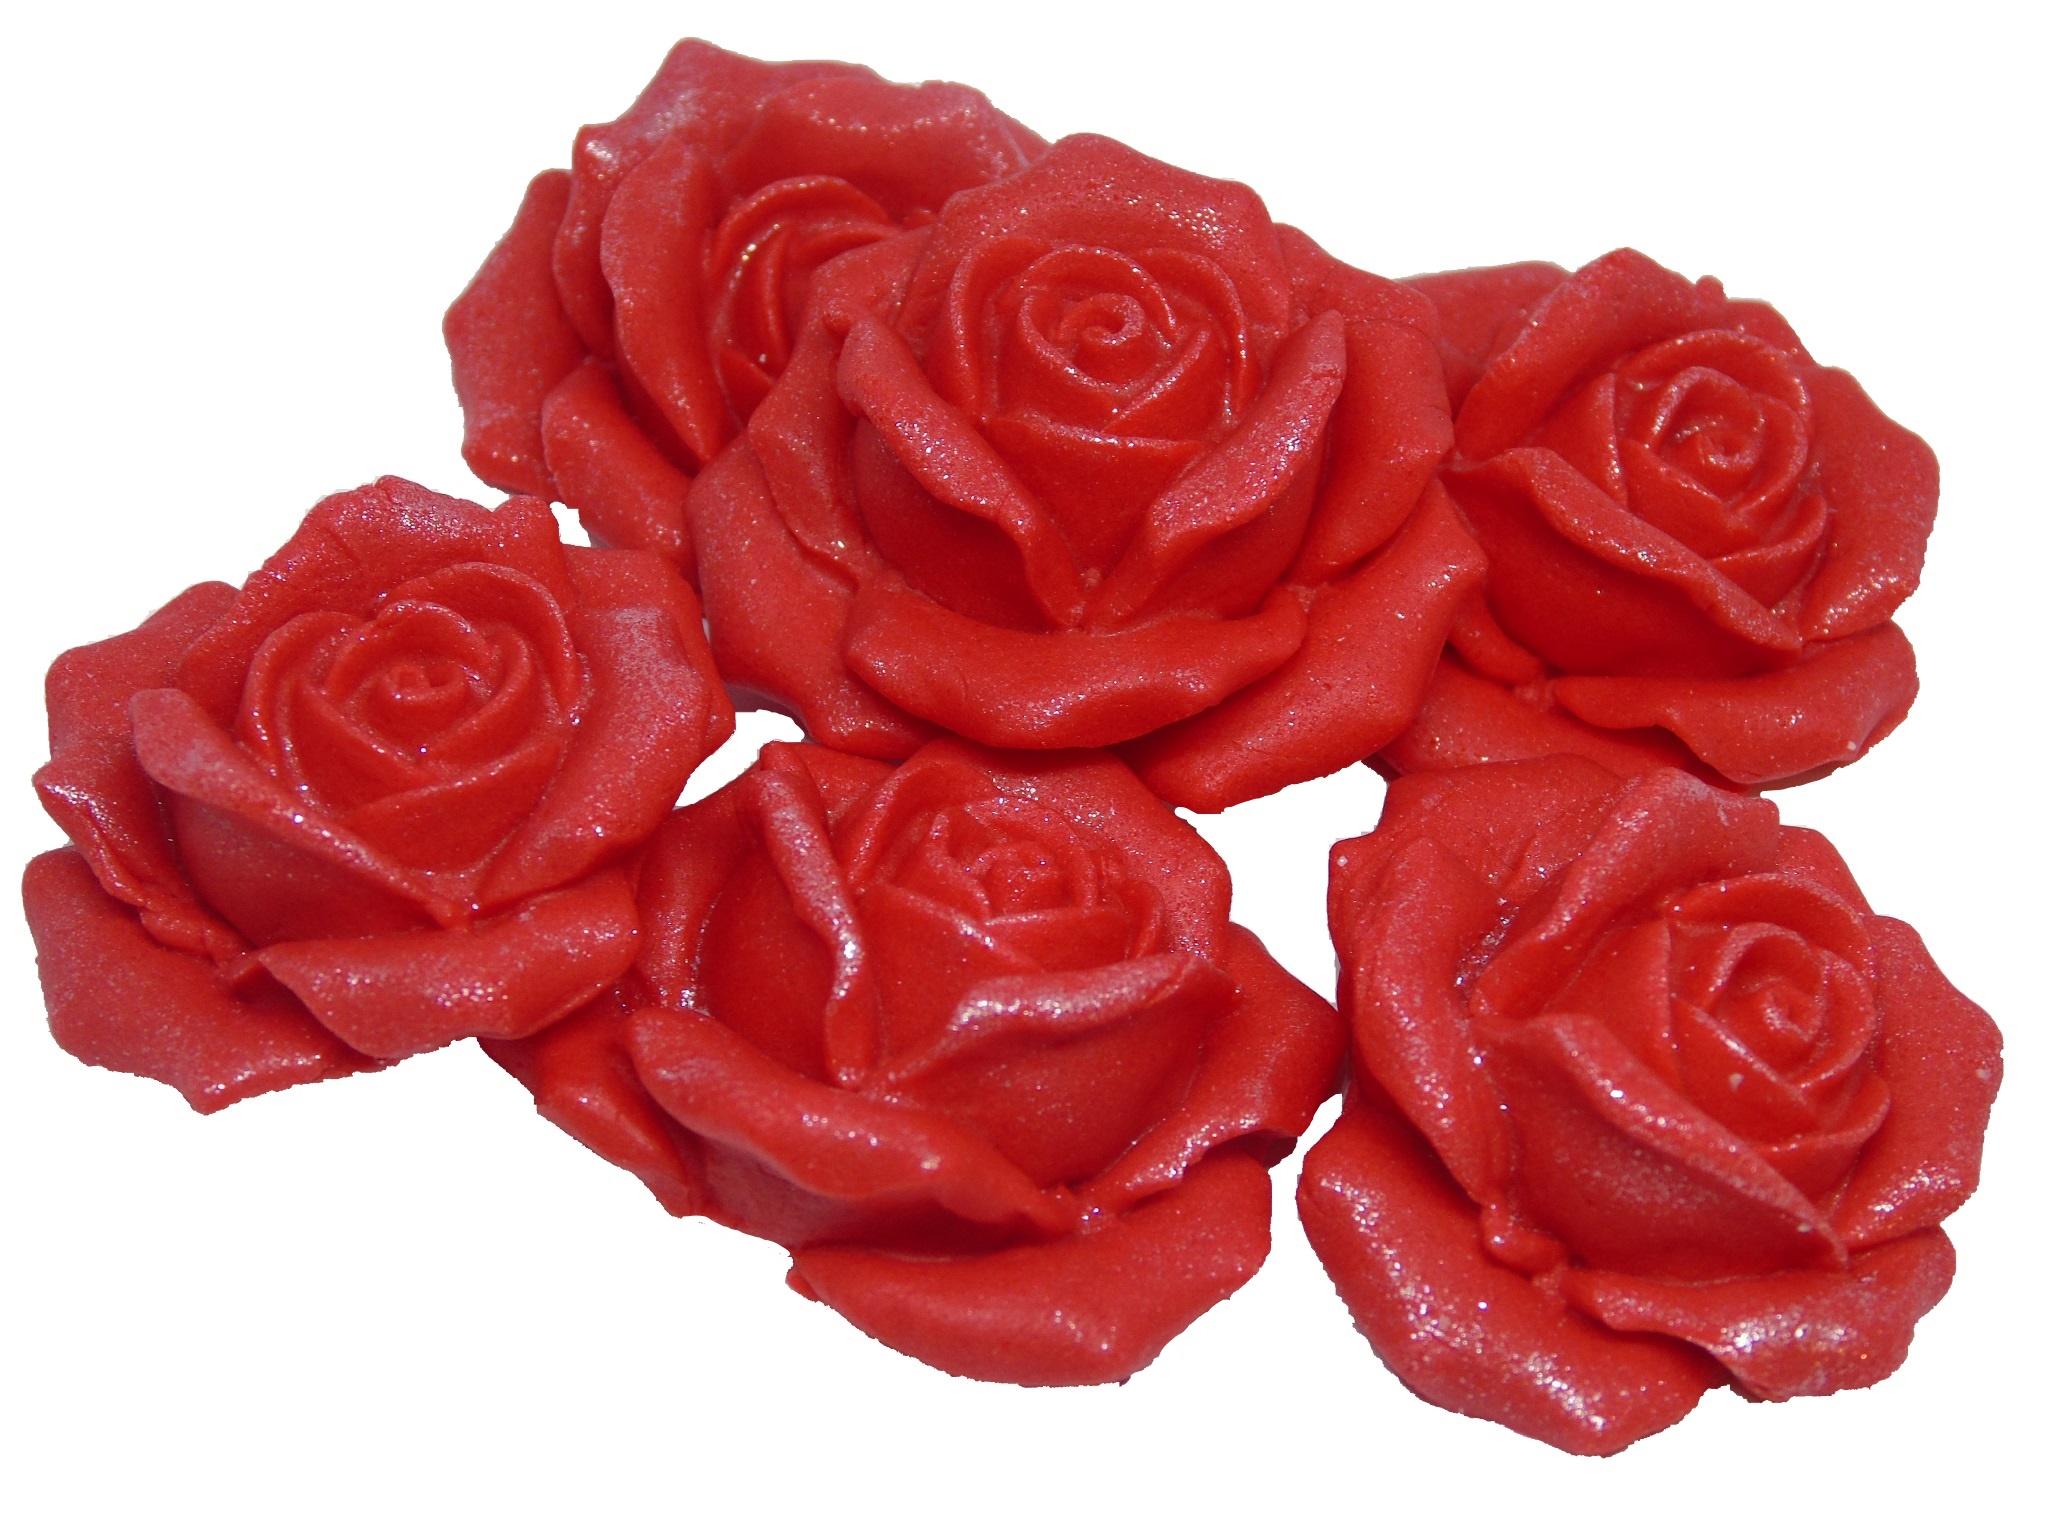 6 Edible Large Red Glittered Roses Vegan Cake Topper Decorations